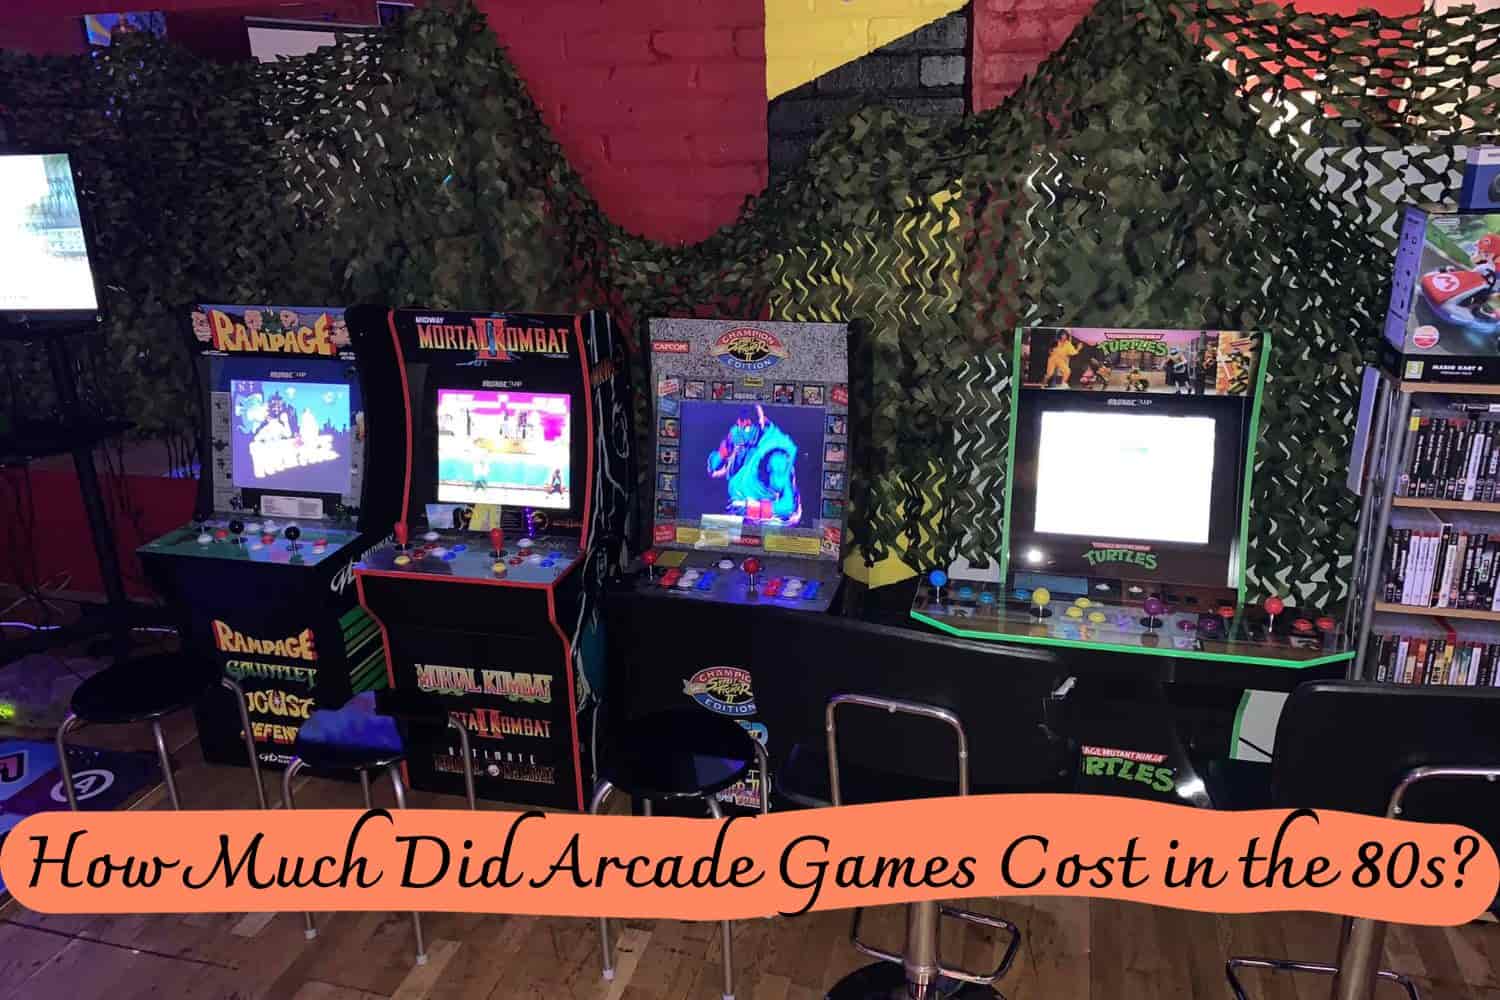 How Much Did Arcade Games Cost in the 80s